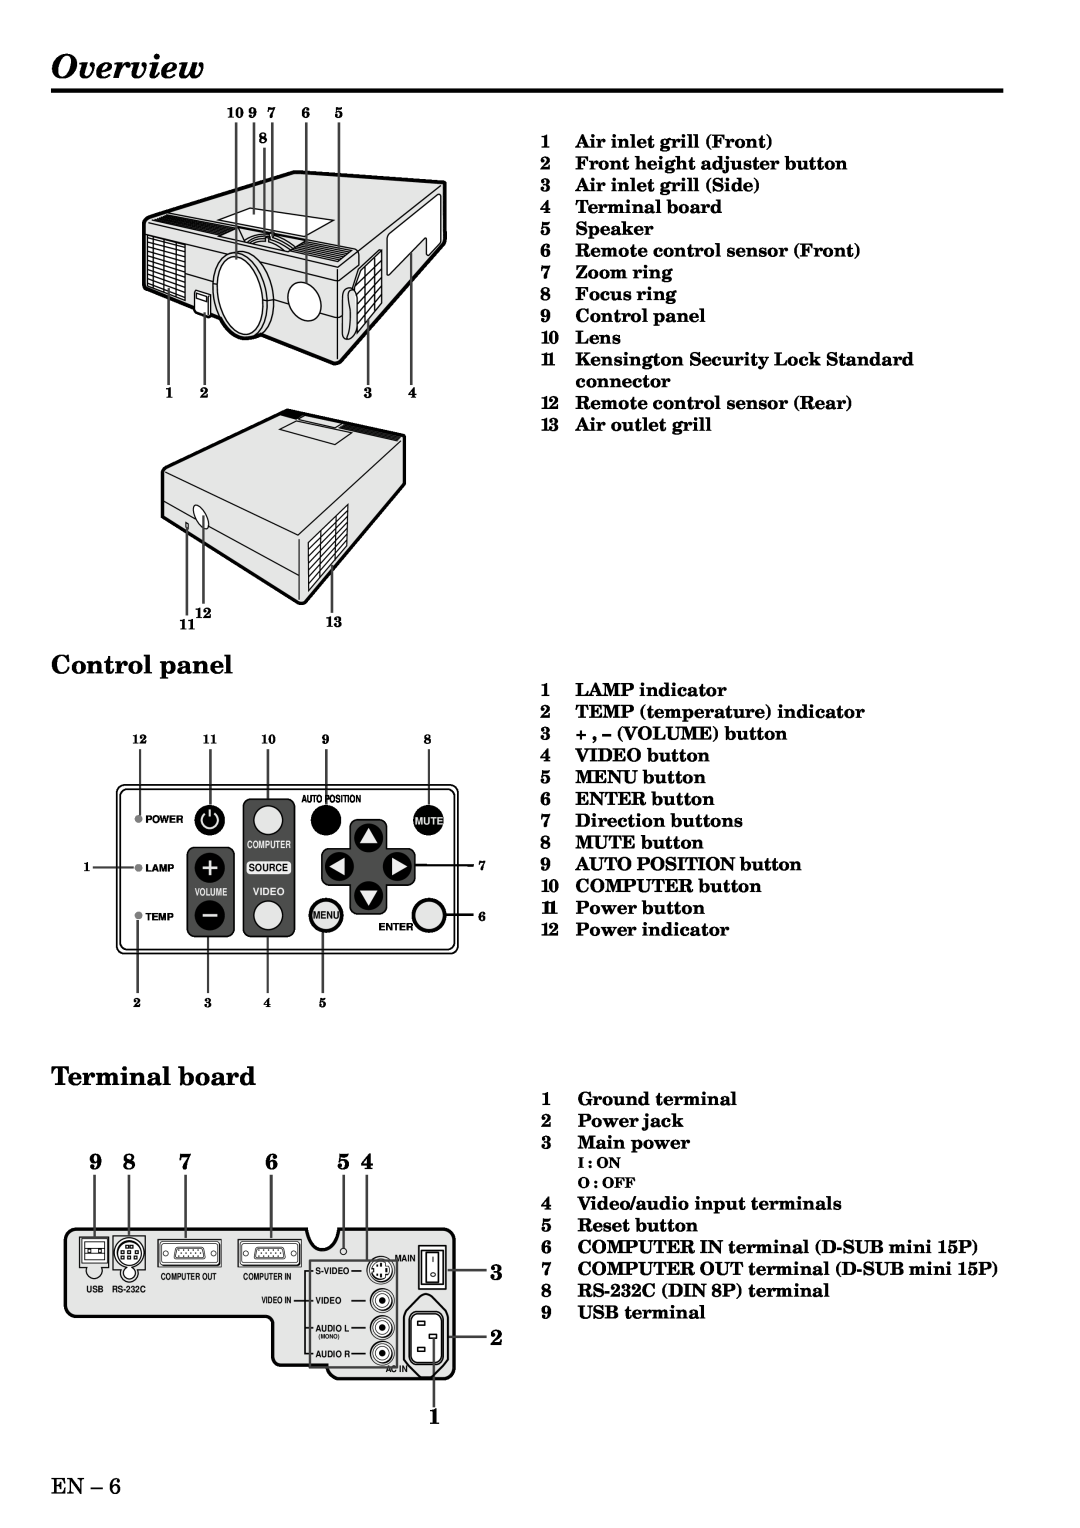 Mitsubishi Electronics X70B Overview, Control panel, Terminal board, Air inlet grill Front, Front height adjuster button 